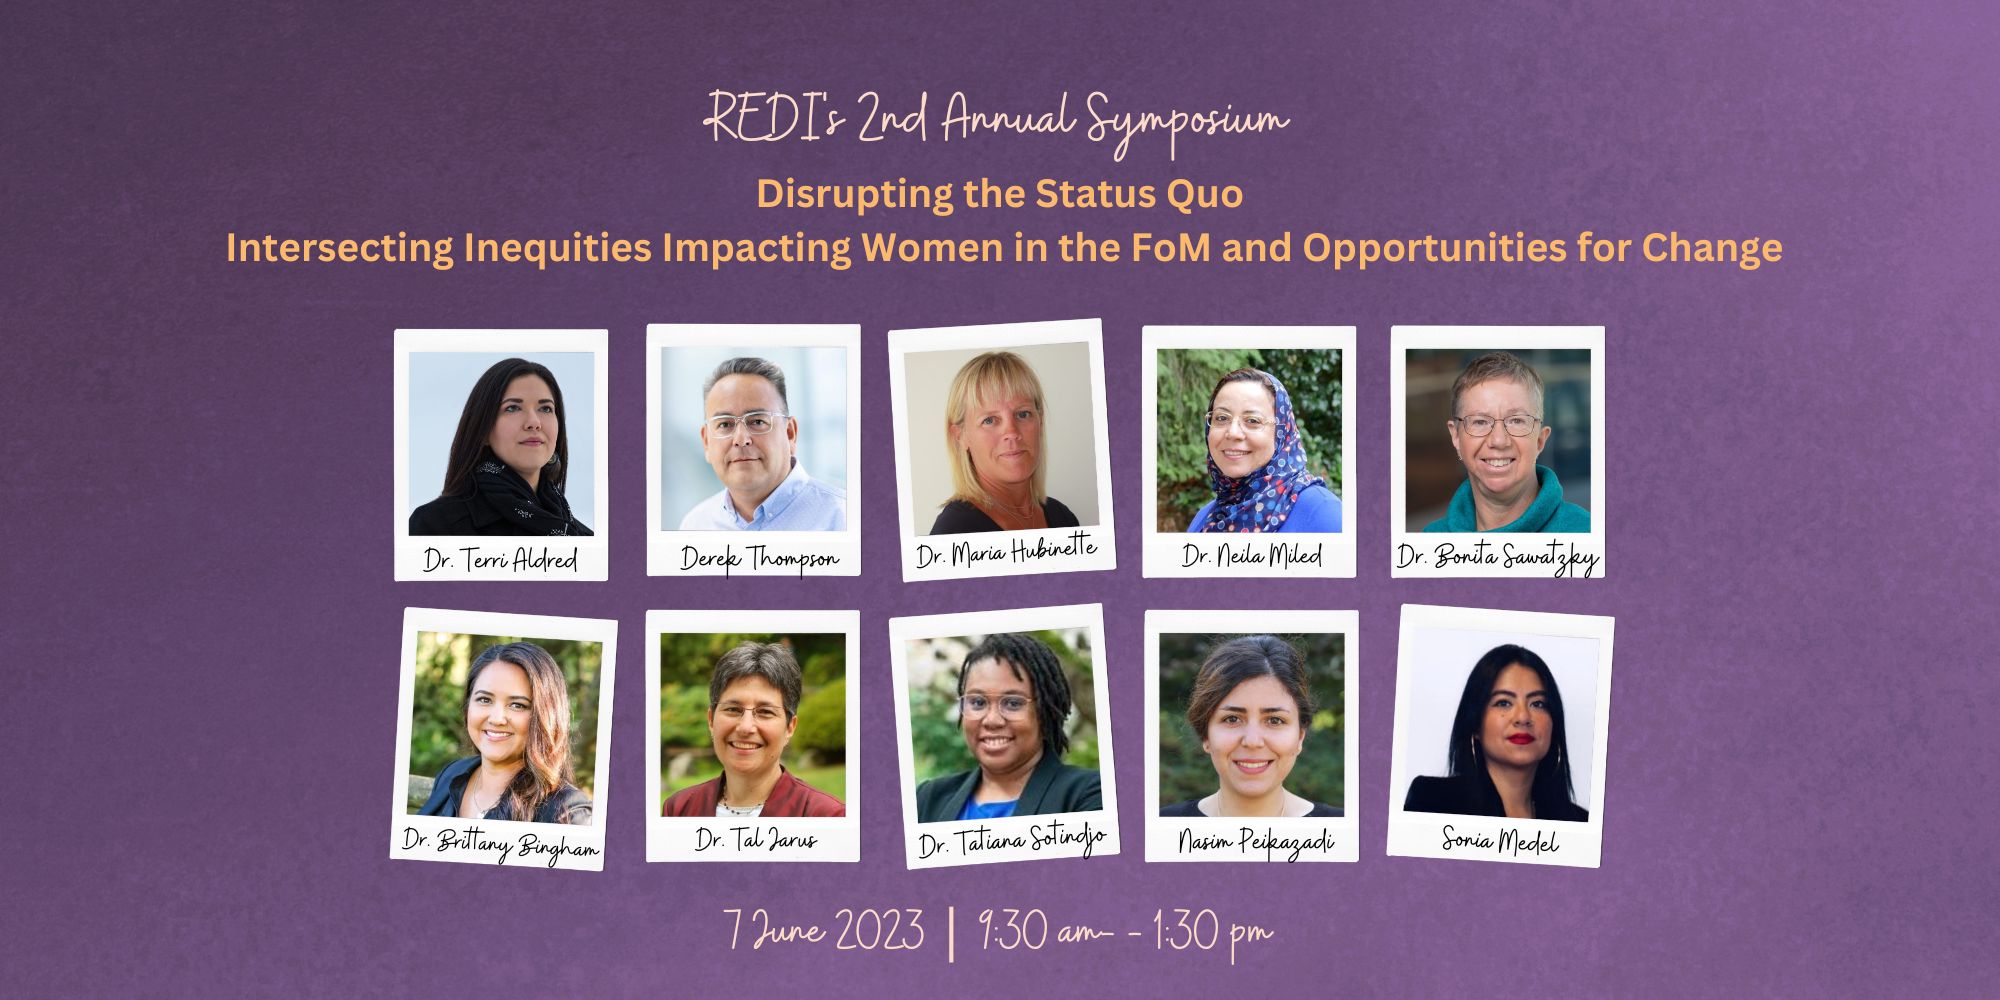 The Faculty of Medicine’s REDI Office presents: Disrupting the Status Quo: Intersecting Inequities Impacting Women in the Faculty of Medicine and Opportunities for Change